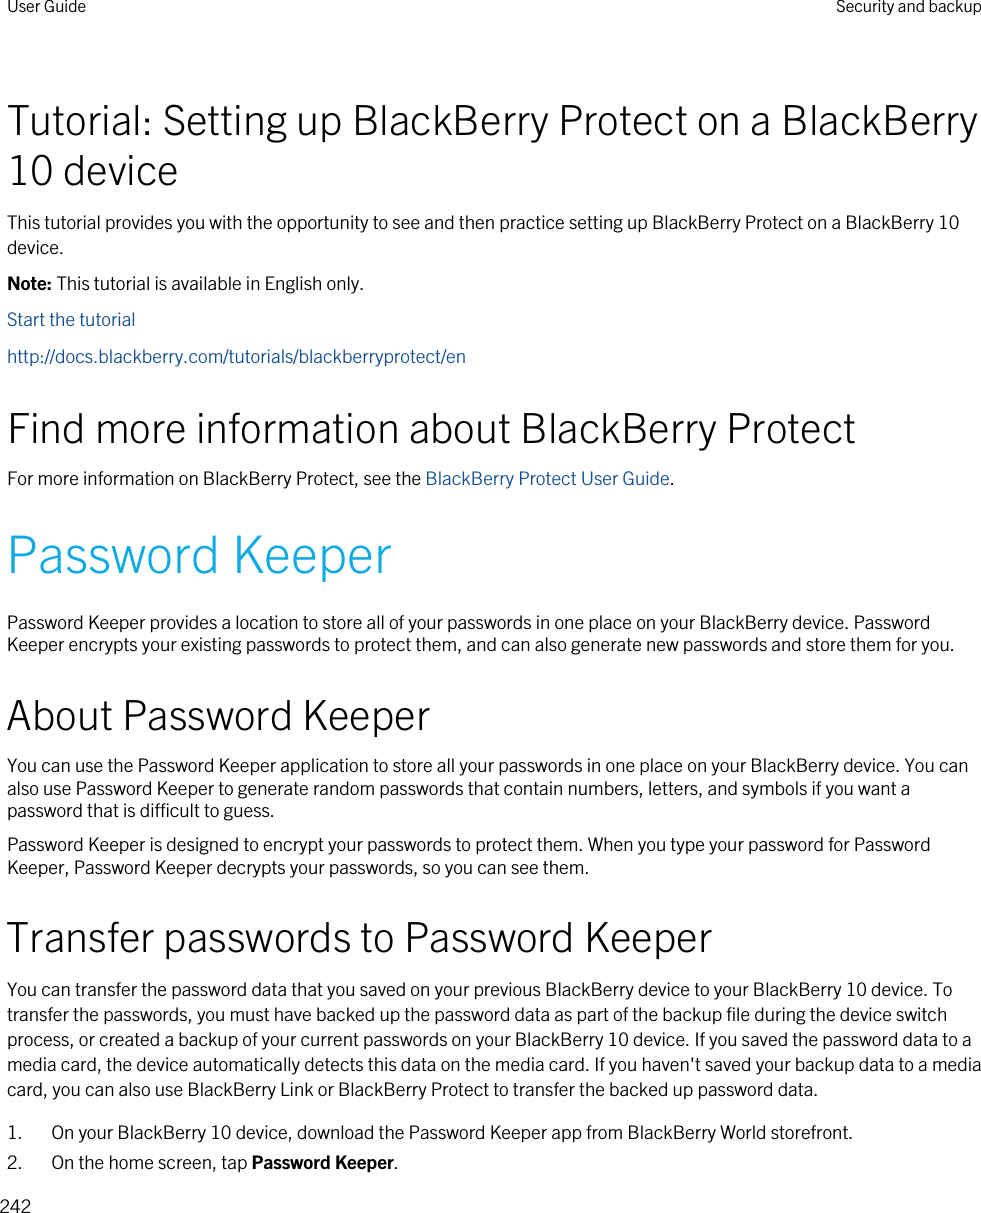 Tutorial: Setting up BlackBerry Protect on a BlackBerry 10 deviceThis tutorial provides you with the opportunity to see and then practice setting up BlackBerry Protect on a BlackBerry 10 device.Note: This tutorial is available in English only.Start the tutorialhttp://docs.blackberry.com/tutorials/blackberryprotect/enFind more information about BlackBerry ProtectFor more information on BlackBerry Protect, see the BlackBerry Protect User Guide.Password KeeperPassword Keeper provides a location to store all of your passwords in one place on your BlackBerry device. Password Keeper encrypts your existing passwords to protect them, and can also generate new passwords and store them for you.About Password KeeperYou can use the Password Keeper application to store all your passwords in one place on your BlackBerry device. You can also use Password Keeper to generate random passwords that contain numbers, letters, and symbols if you want a password that is difficult to guess.Password Keeper is designed to encrypt your passwords to protect them. When you type your password for Password Keeper, Password Keeper decrypts your passwords, so you can see them.Transfer passwords to Password KeeperYou can transfer the password data that you saved on your previous BlackBerry device to your BlackBerry 10 device. To transfer the passwords, you must have backed up the password data as part of the backup file during the device switch process, or created a backup of your current passwords on your BlackBerry 10 device. If you saved the password data to a media card, the device automatically detects this data on the media card. If you haven&apos;t saved your backup data to a media card, you can also use BlackBerry Link or BlackBerry Protect to transfer the backed up password data.1. On your BlackBerry 10 device, download the Password Keeper app from BlackBerry World storefront.2. On the home screen, tap Password Keeper.User Guide Security and backup242